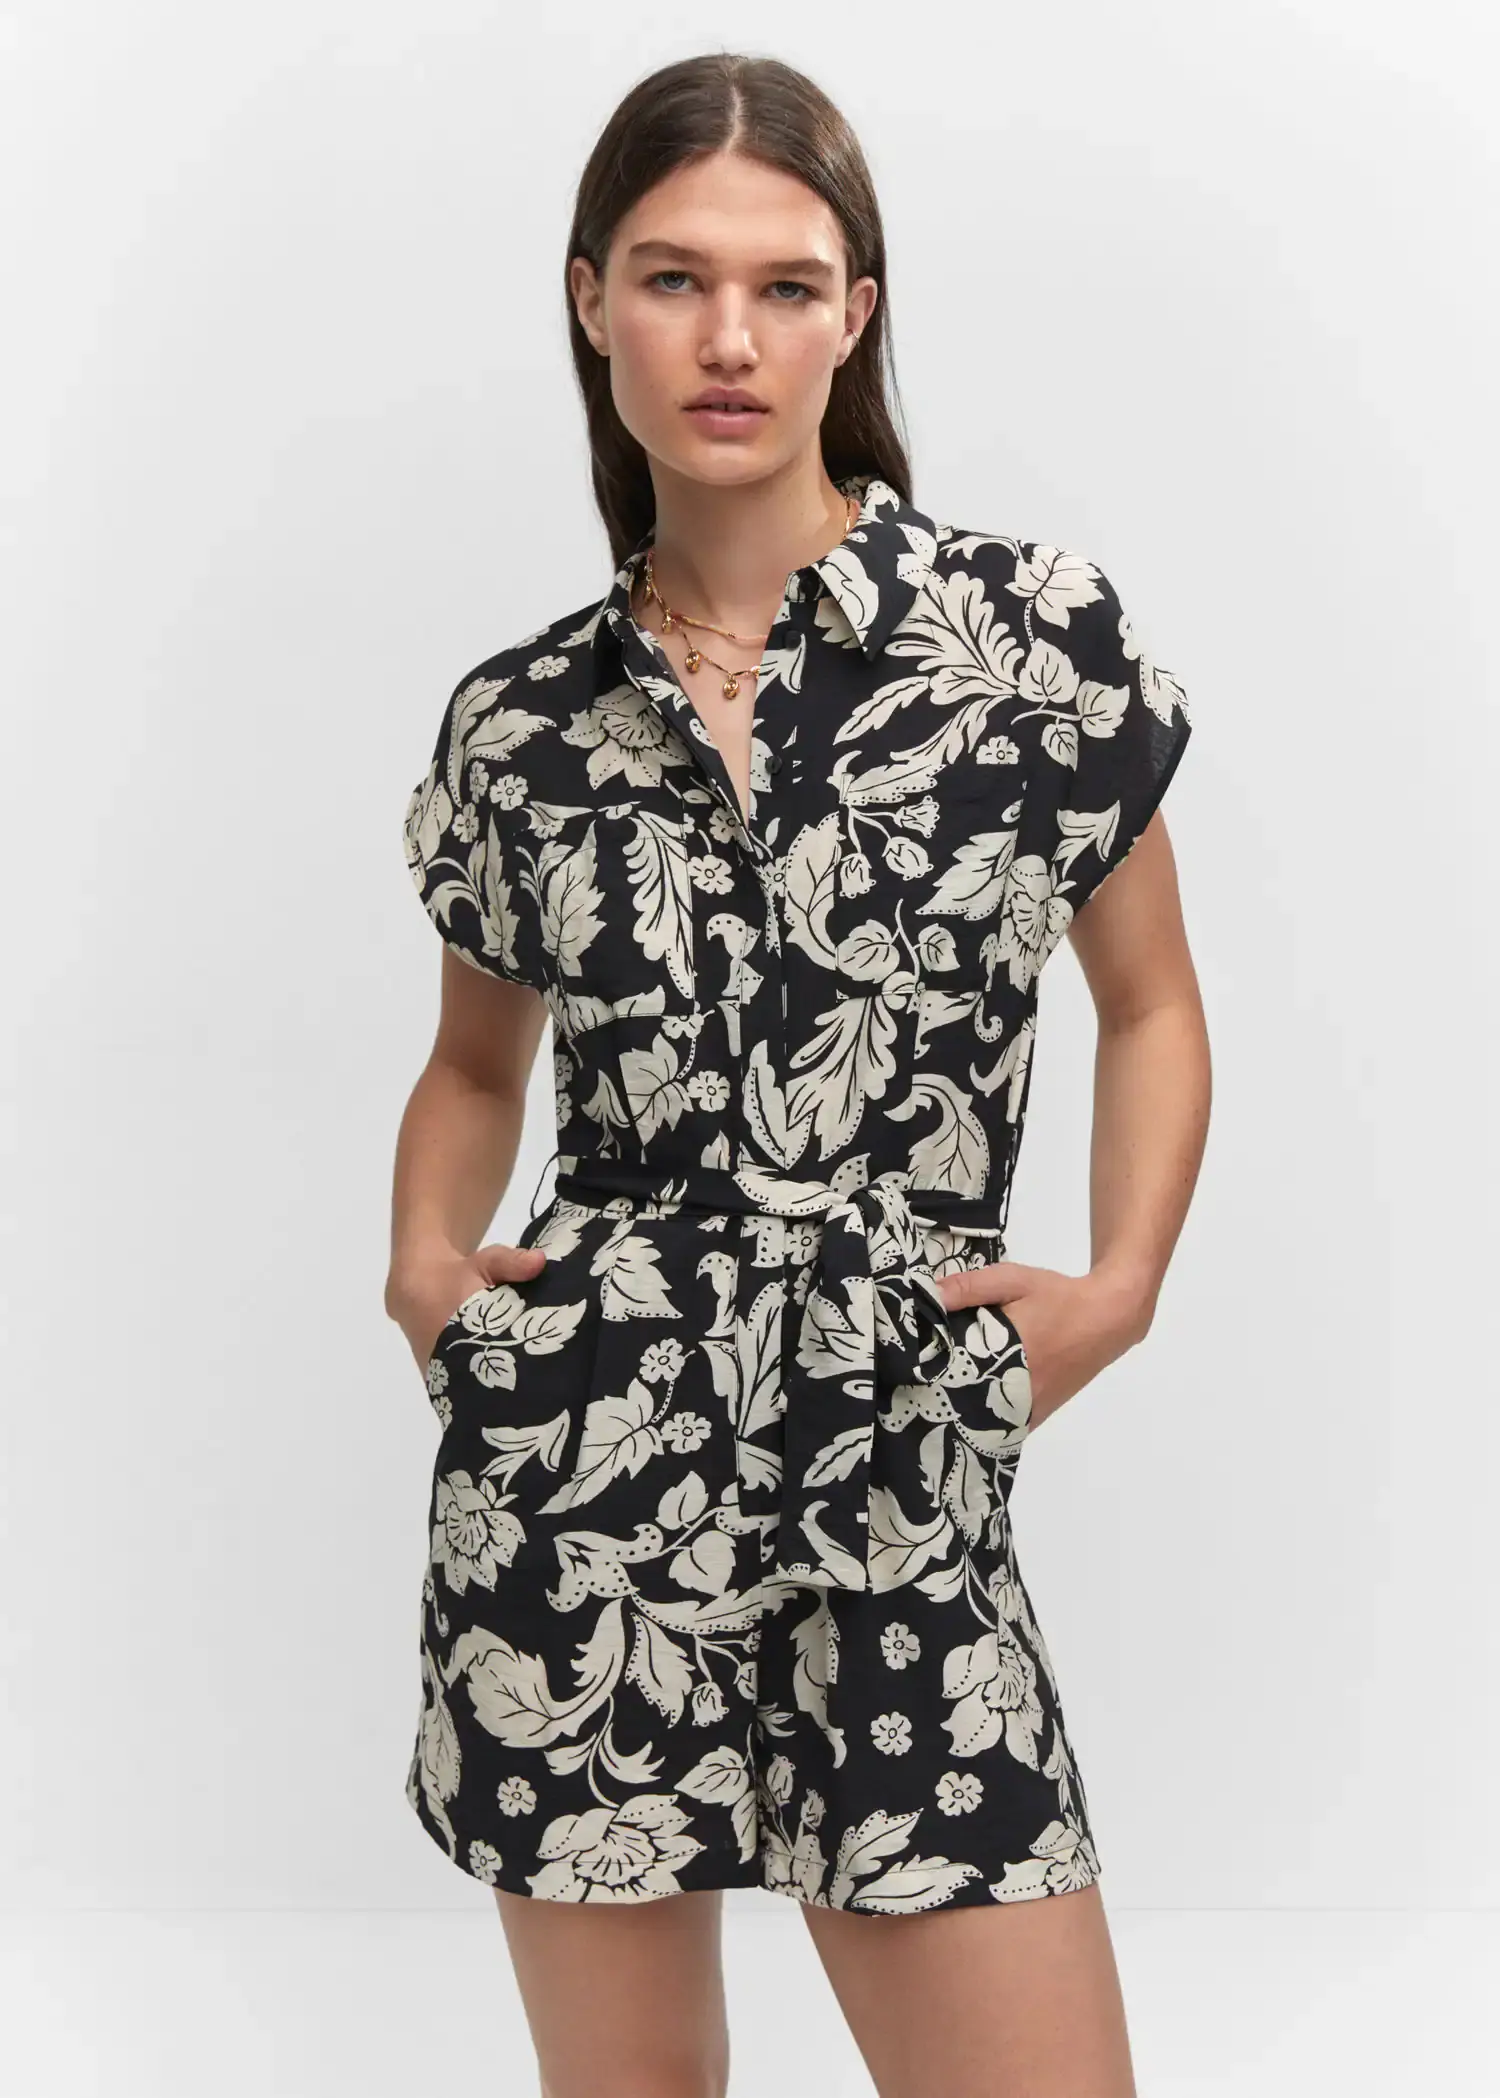 Mango Floral-print jumpsuit with tie. a woman in a black and white floral dress. 